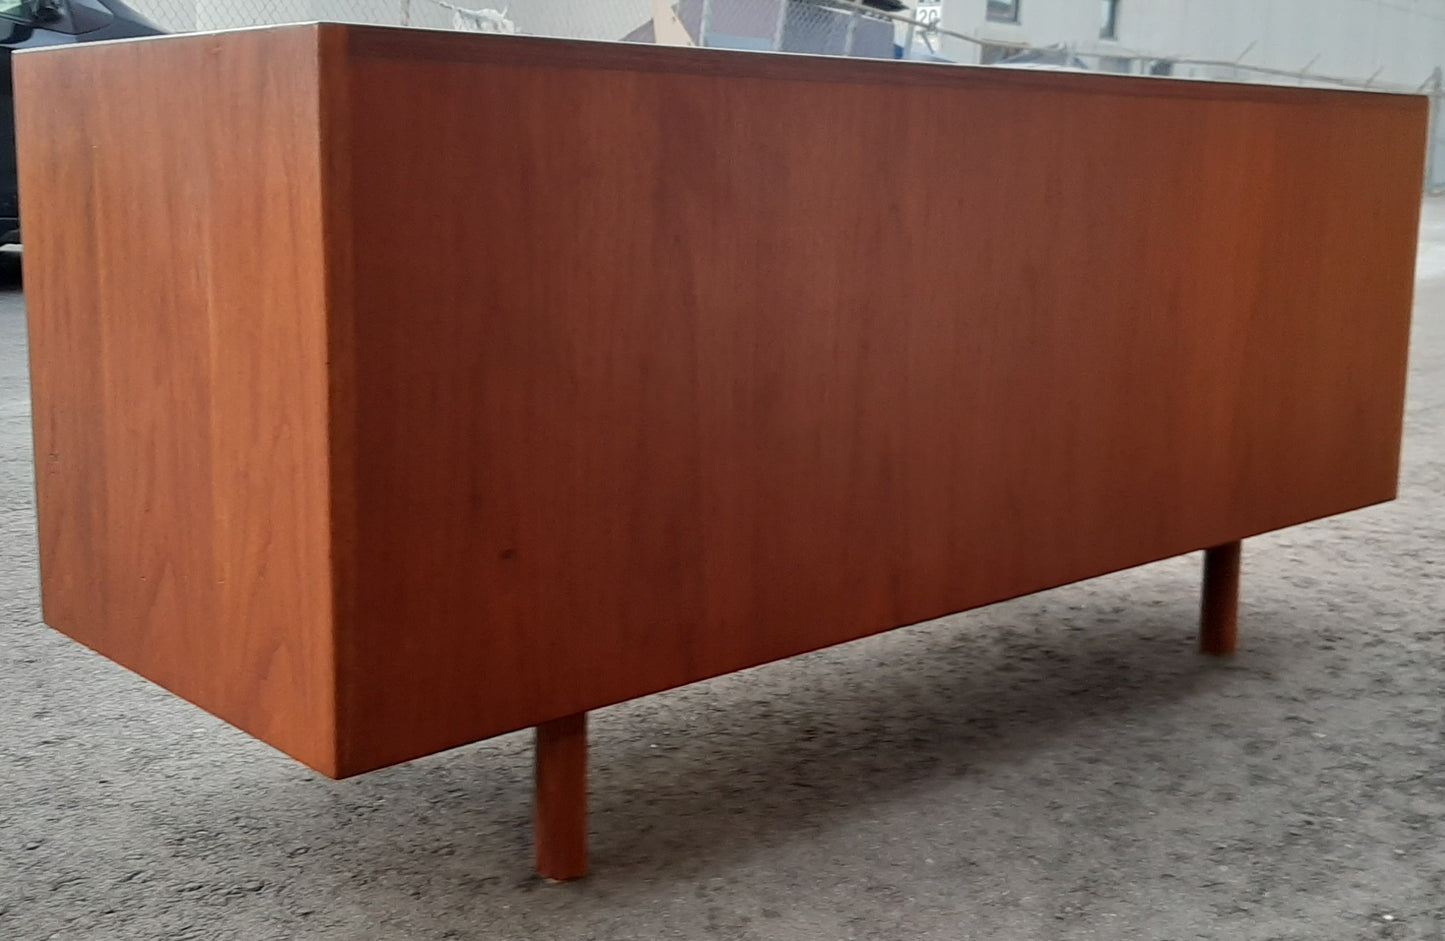 REFINISHED  MCM Walnut Credenza with Finished Back, wide and low